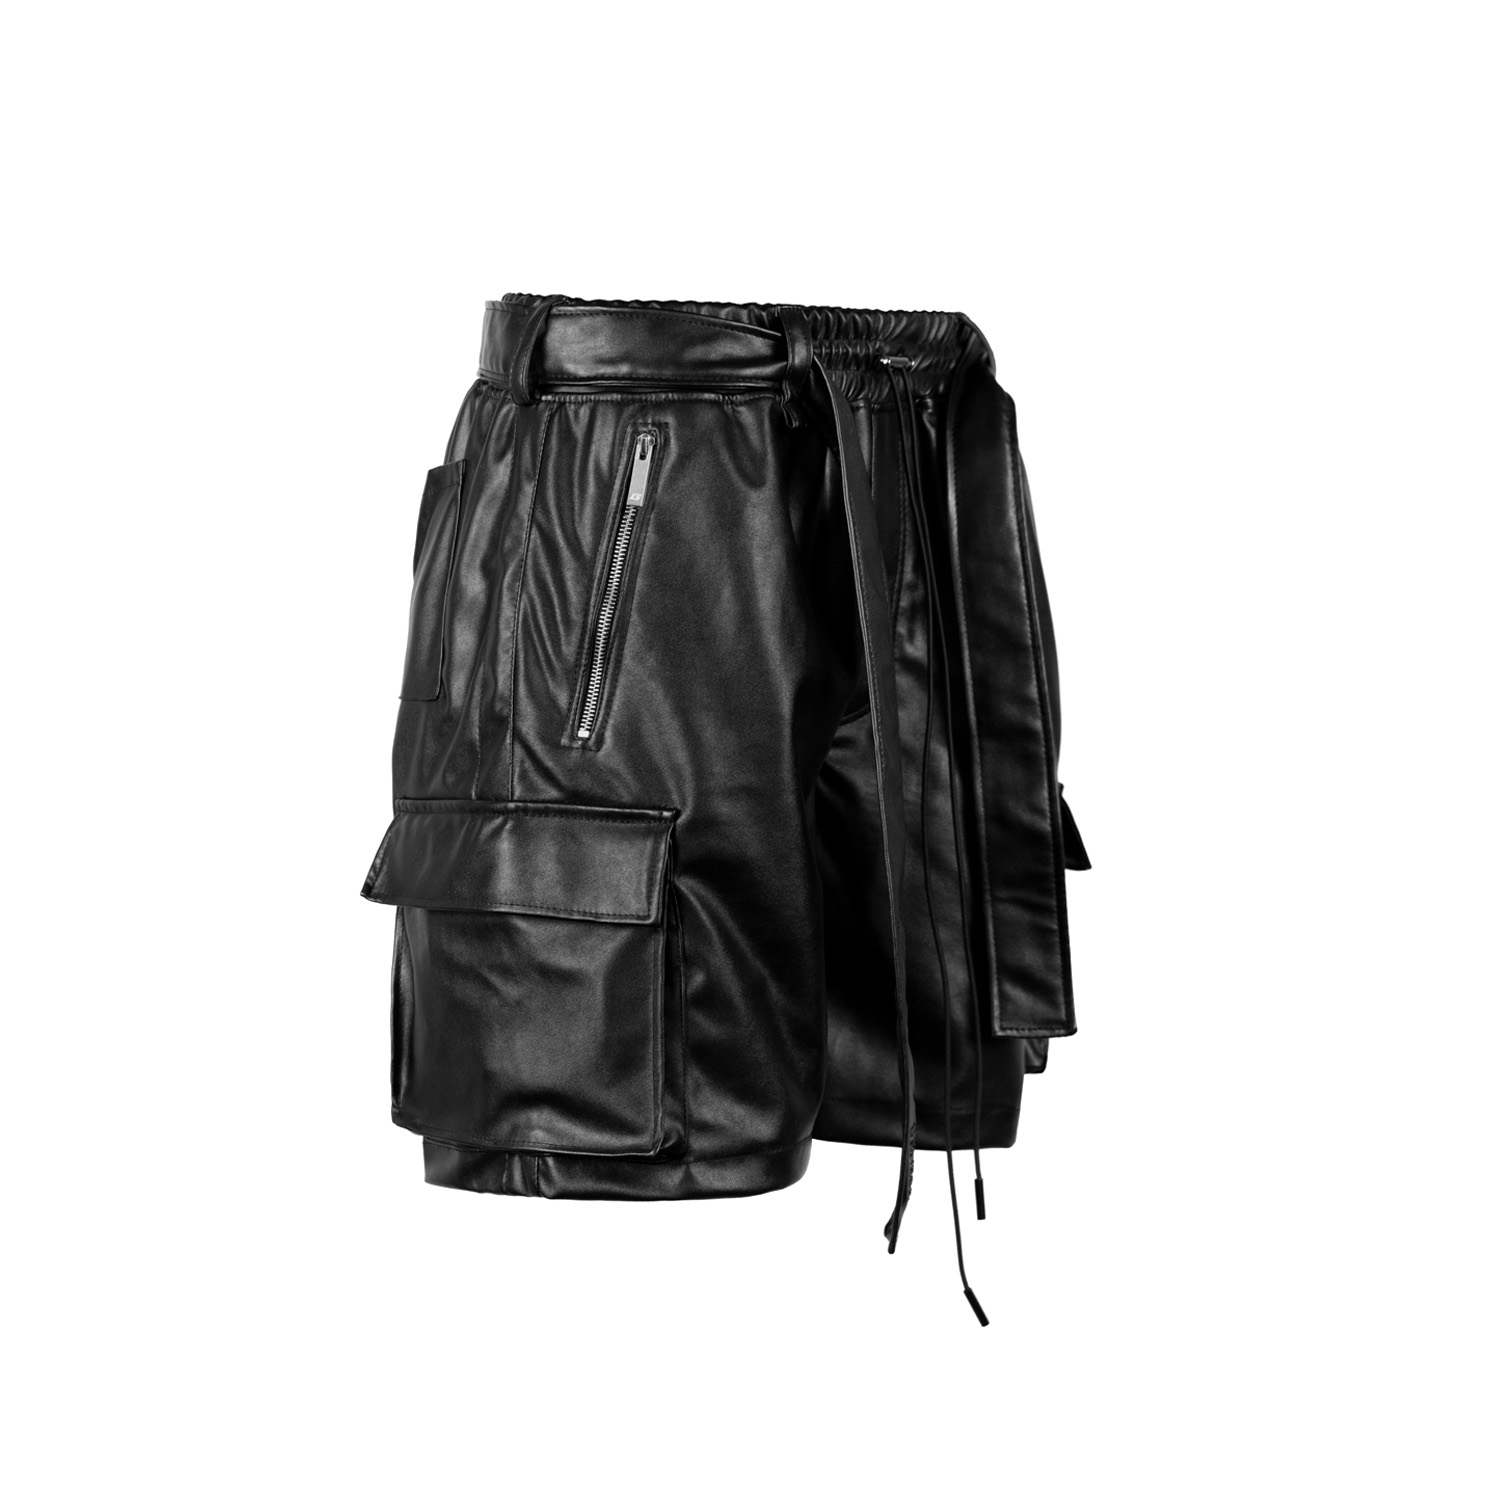 leather_black_panther_shorts_1500x1500_02